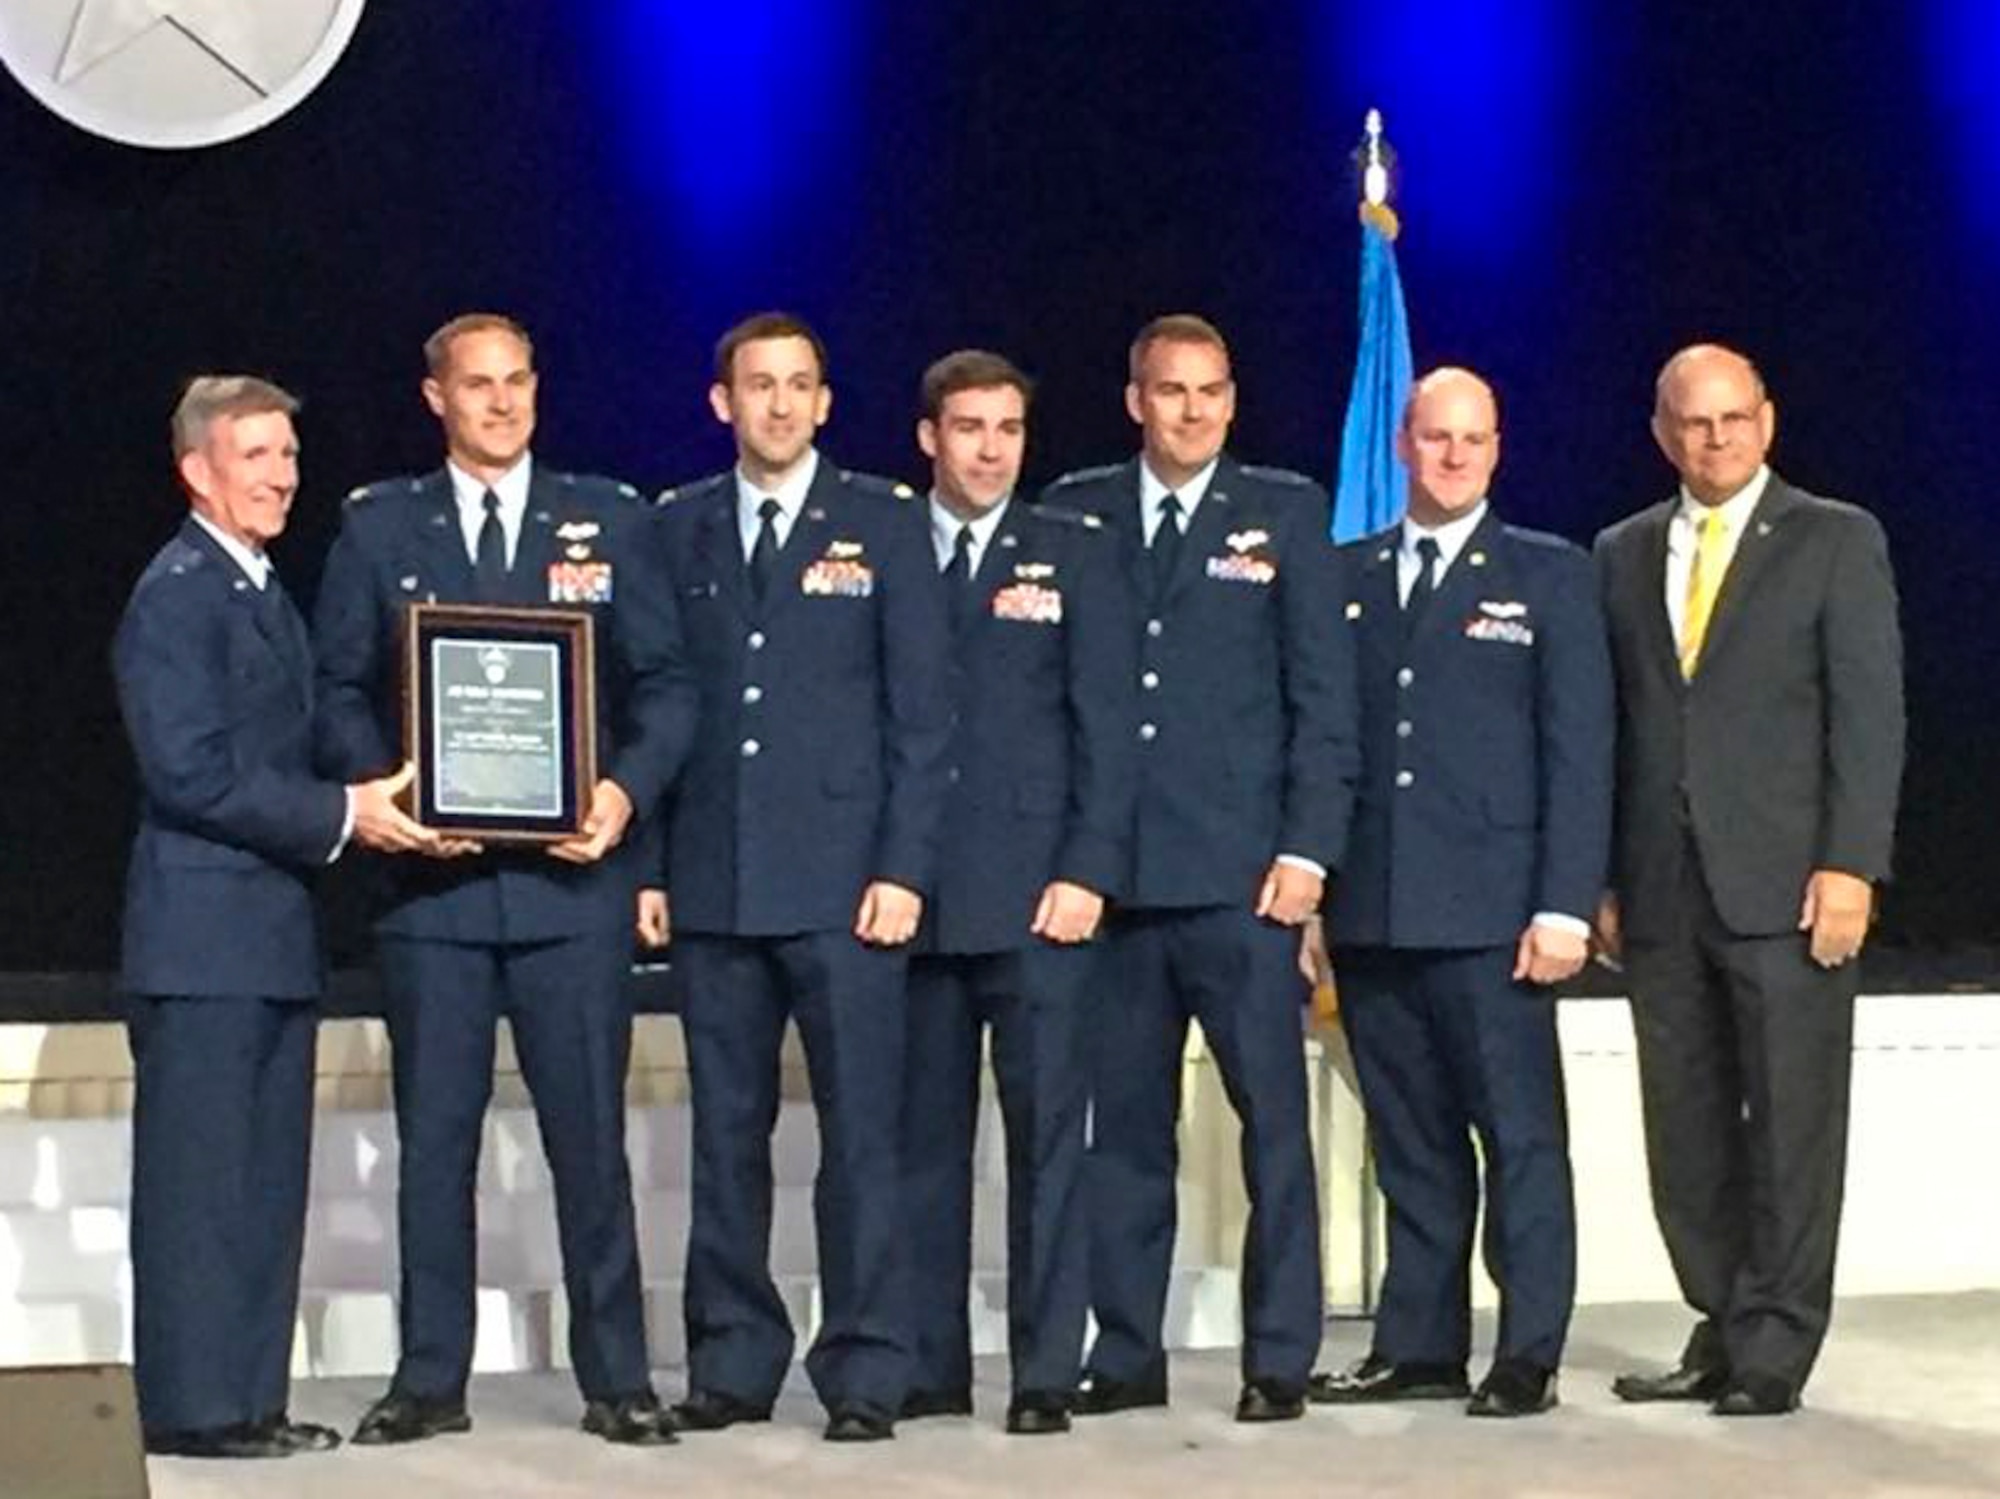 Gen. Herbert Carlisle (left), Air Combat Command commander, presents Lt. Col. Lucas Teel, 336th Fighter Squadron commander, and other members of the squadron with the David. C. Schilling Award at the annual Air, Space & Cyber Conference, Sept. 19, 2016, in National Harbor, Maryland. The award is sponsored by the Air Force Association and recognizes the most outstanding contribution to national defense in the field of flight, in the atmosphere or space, by either an Air Force military member, Department of the Air Force civilian, unit or group of individuals. (Courtesy photo)